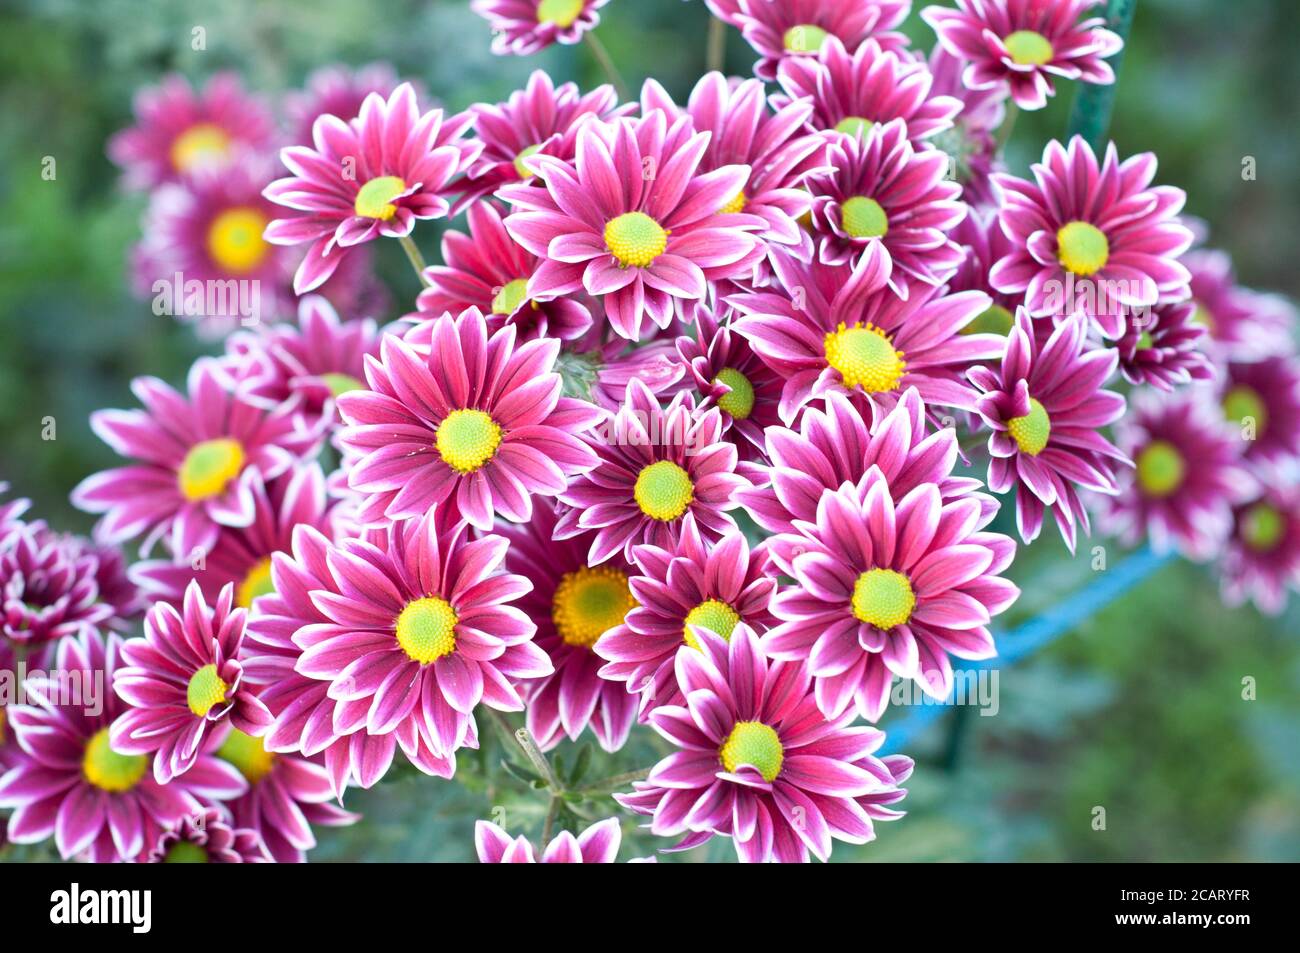 Pink purple white chrysanthemum. Сhrysanthemum flowers with yellow centers and white tips on their petals. Bush of Autumn Garden plants, growing flowe Stock Photo